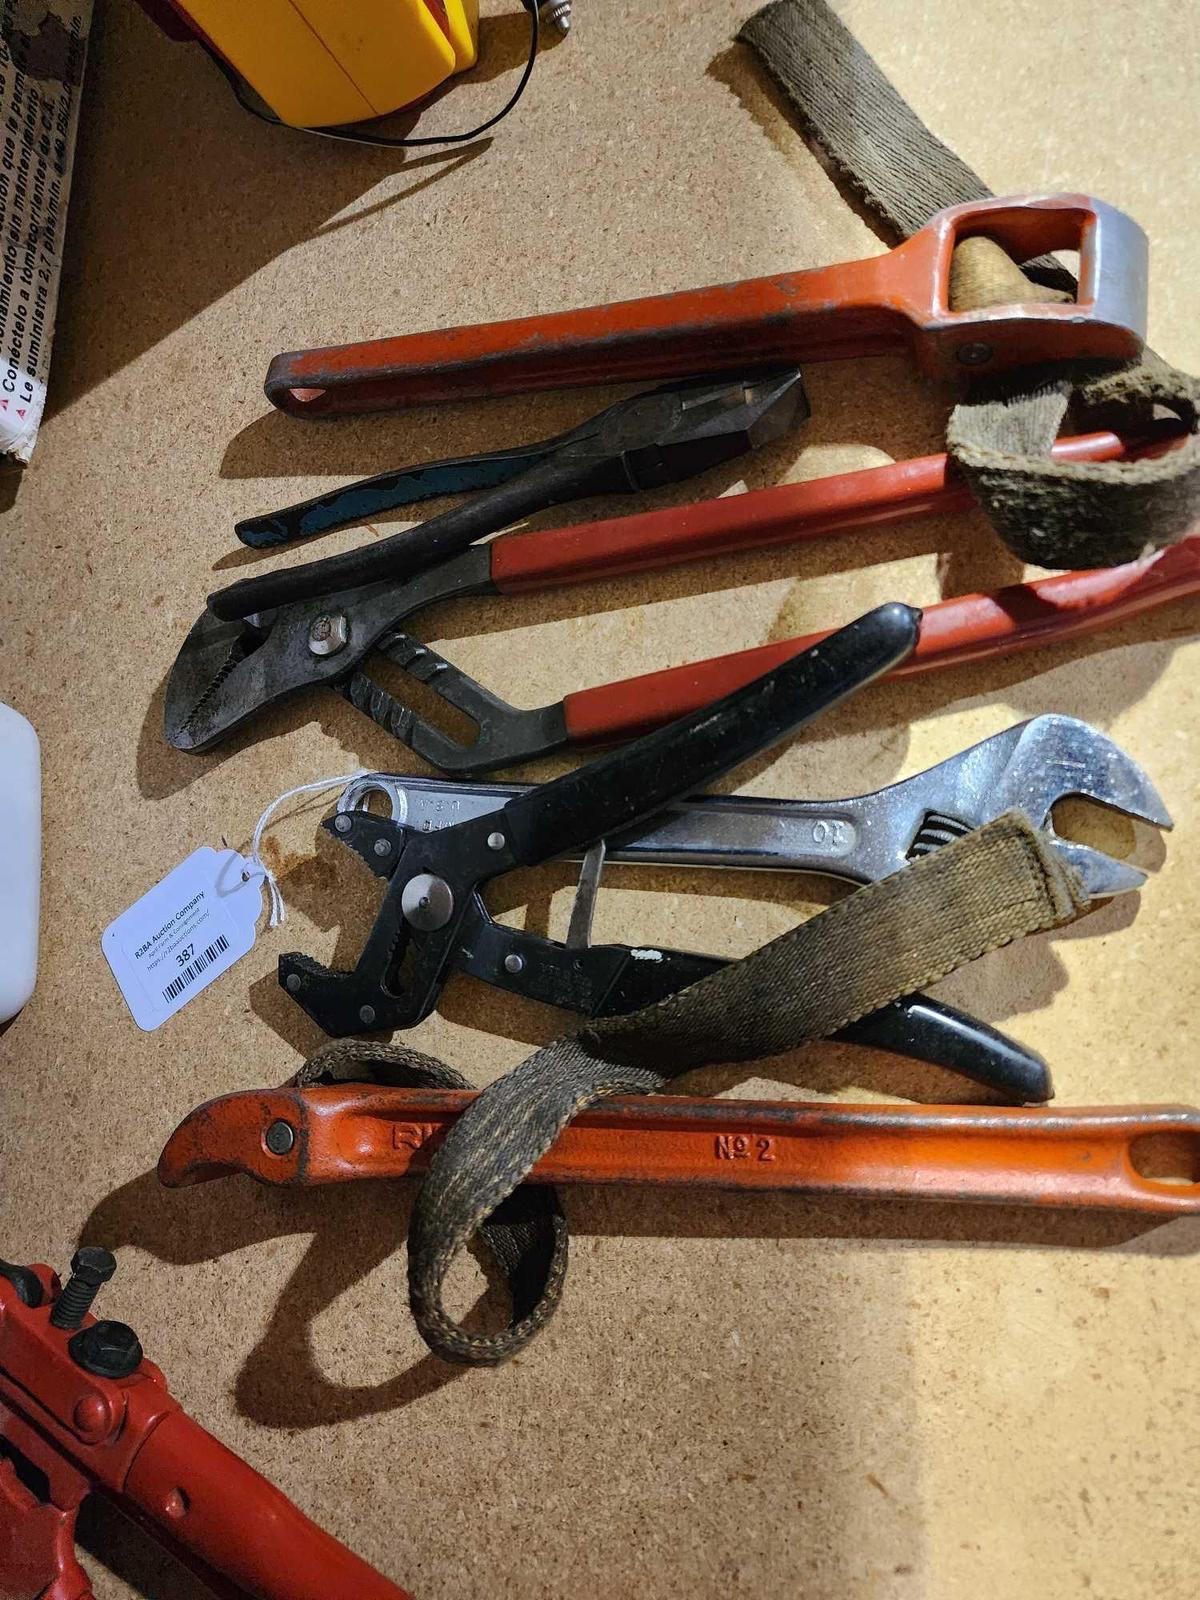 Six wrenches and one plier. Used.